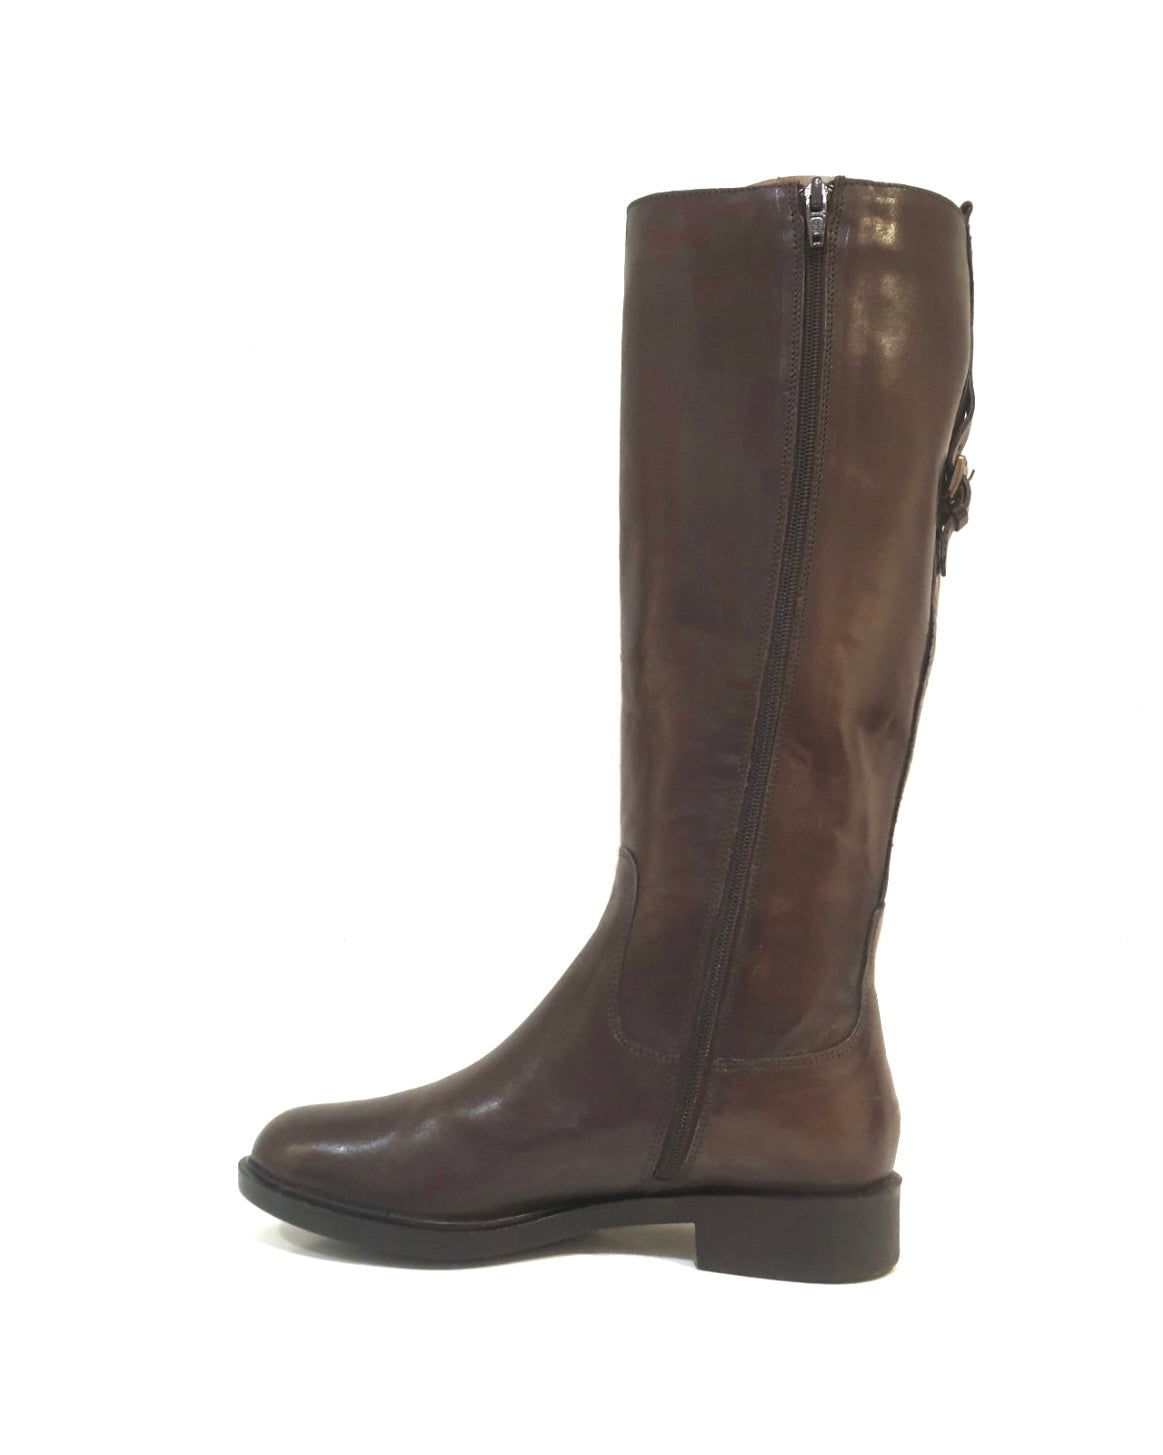 Progetto P054 Toffy T Moro Dark Brown Back Buckle Zip Knee High Boot Made In Italy